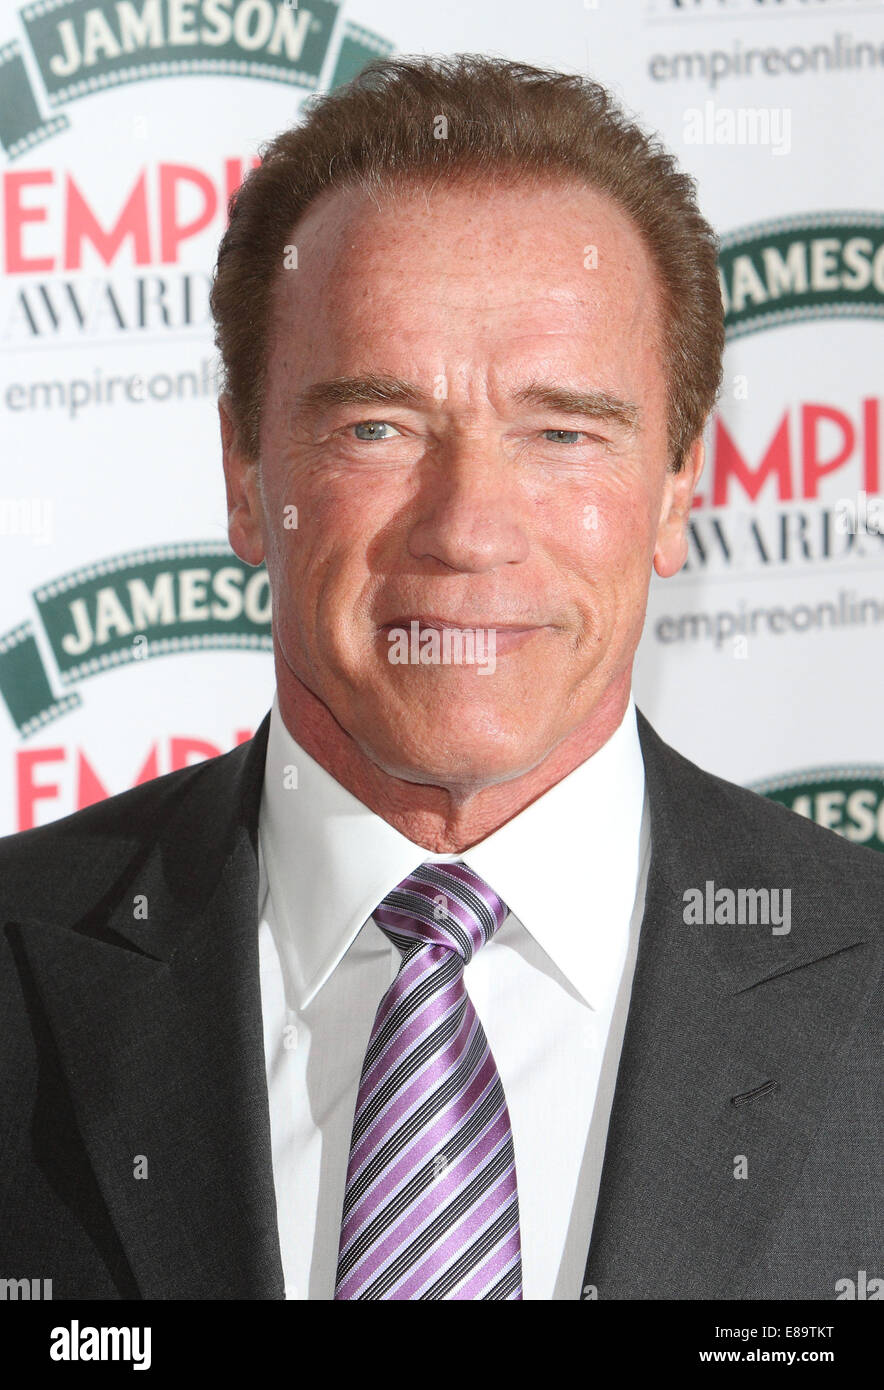 Download preview image - jamesons-empire-film-awards-at-the-grosvenor-house-hotel-park-lane-E89TKT